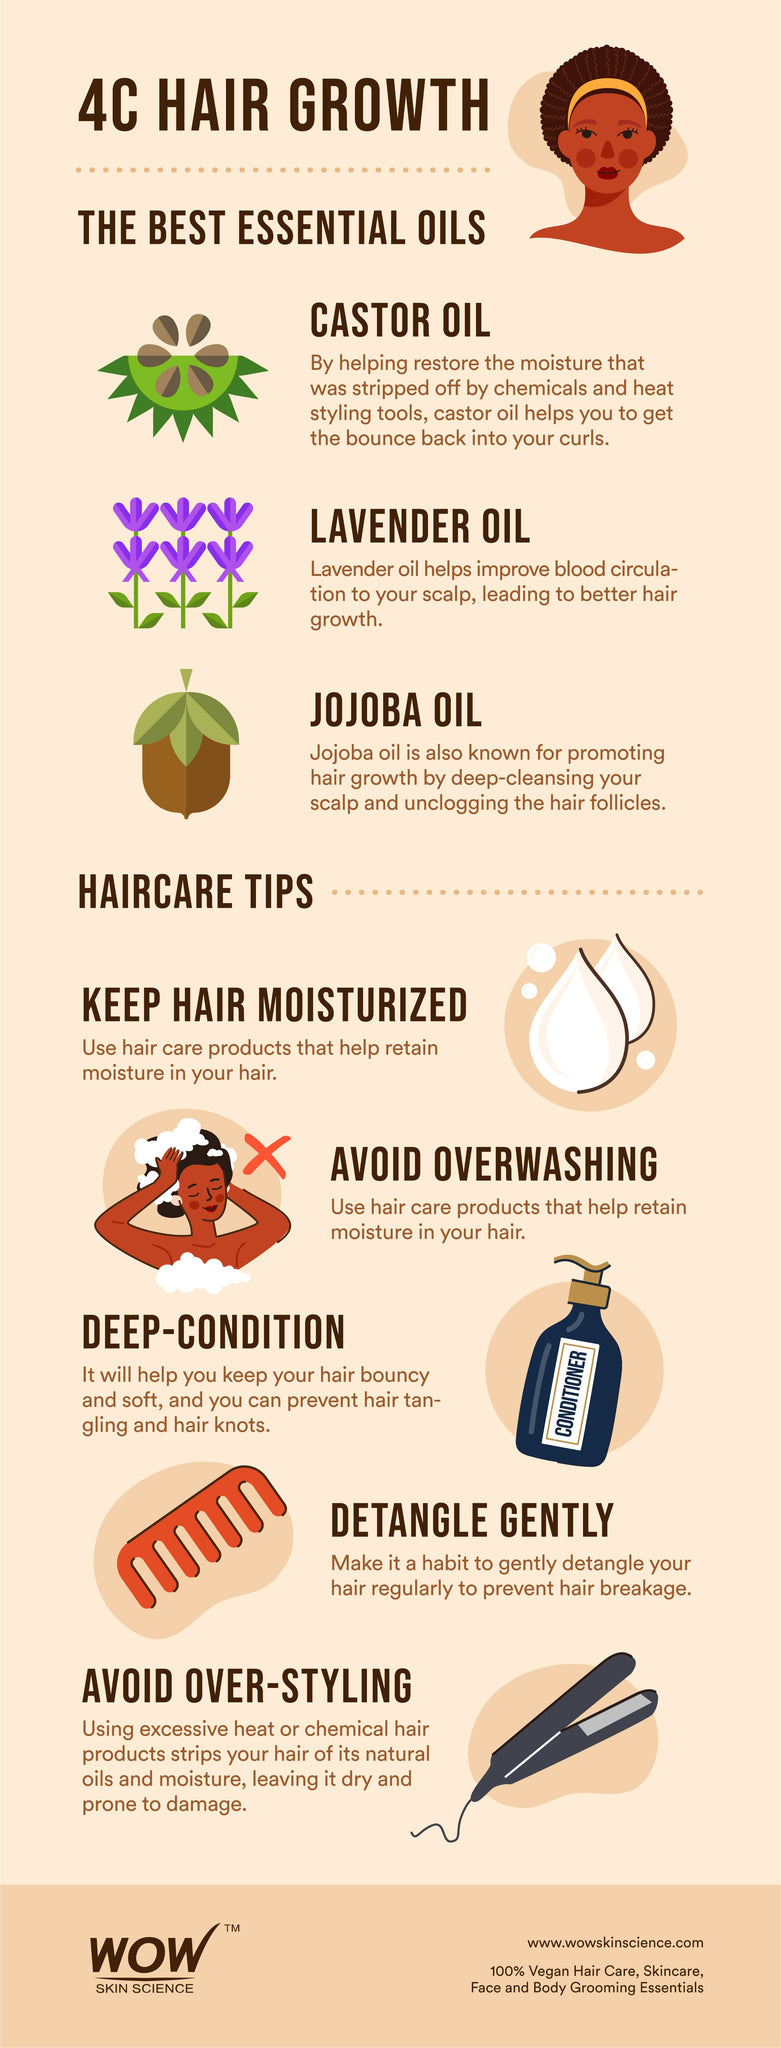 Which is the Best Oil for 4C Hair Growth and Thickness?